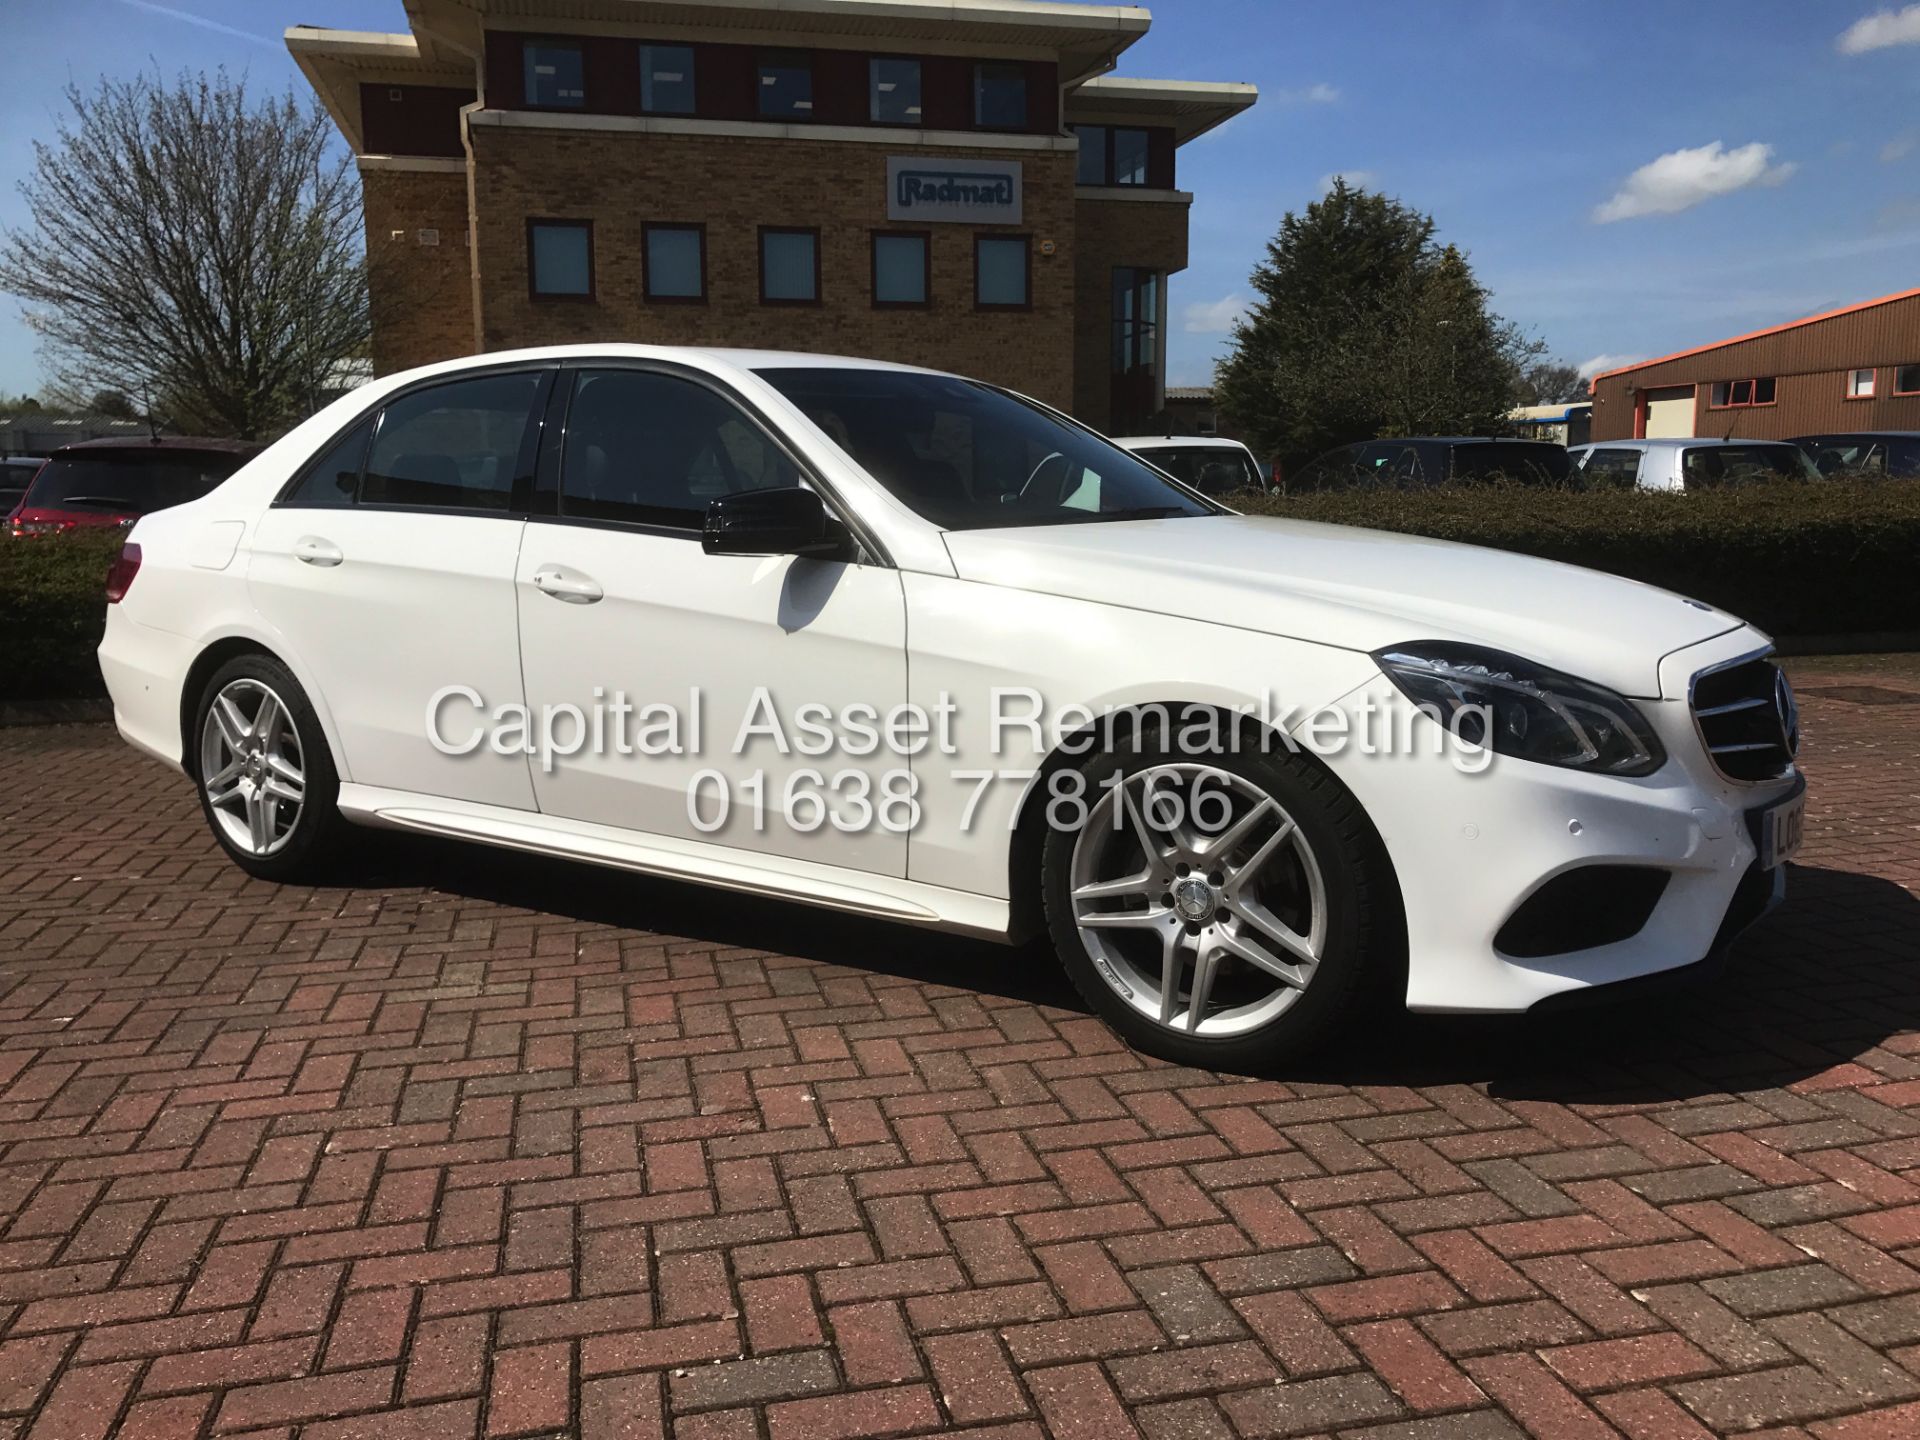 On Sale MERCEDES E220CDI "AMG NIGHT EDITION" 7G TRONIC (2016 MODEL) 1 OWNER - SAT NAV - LEATHER